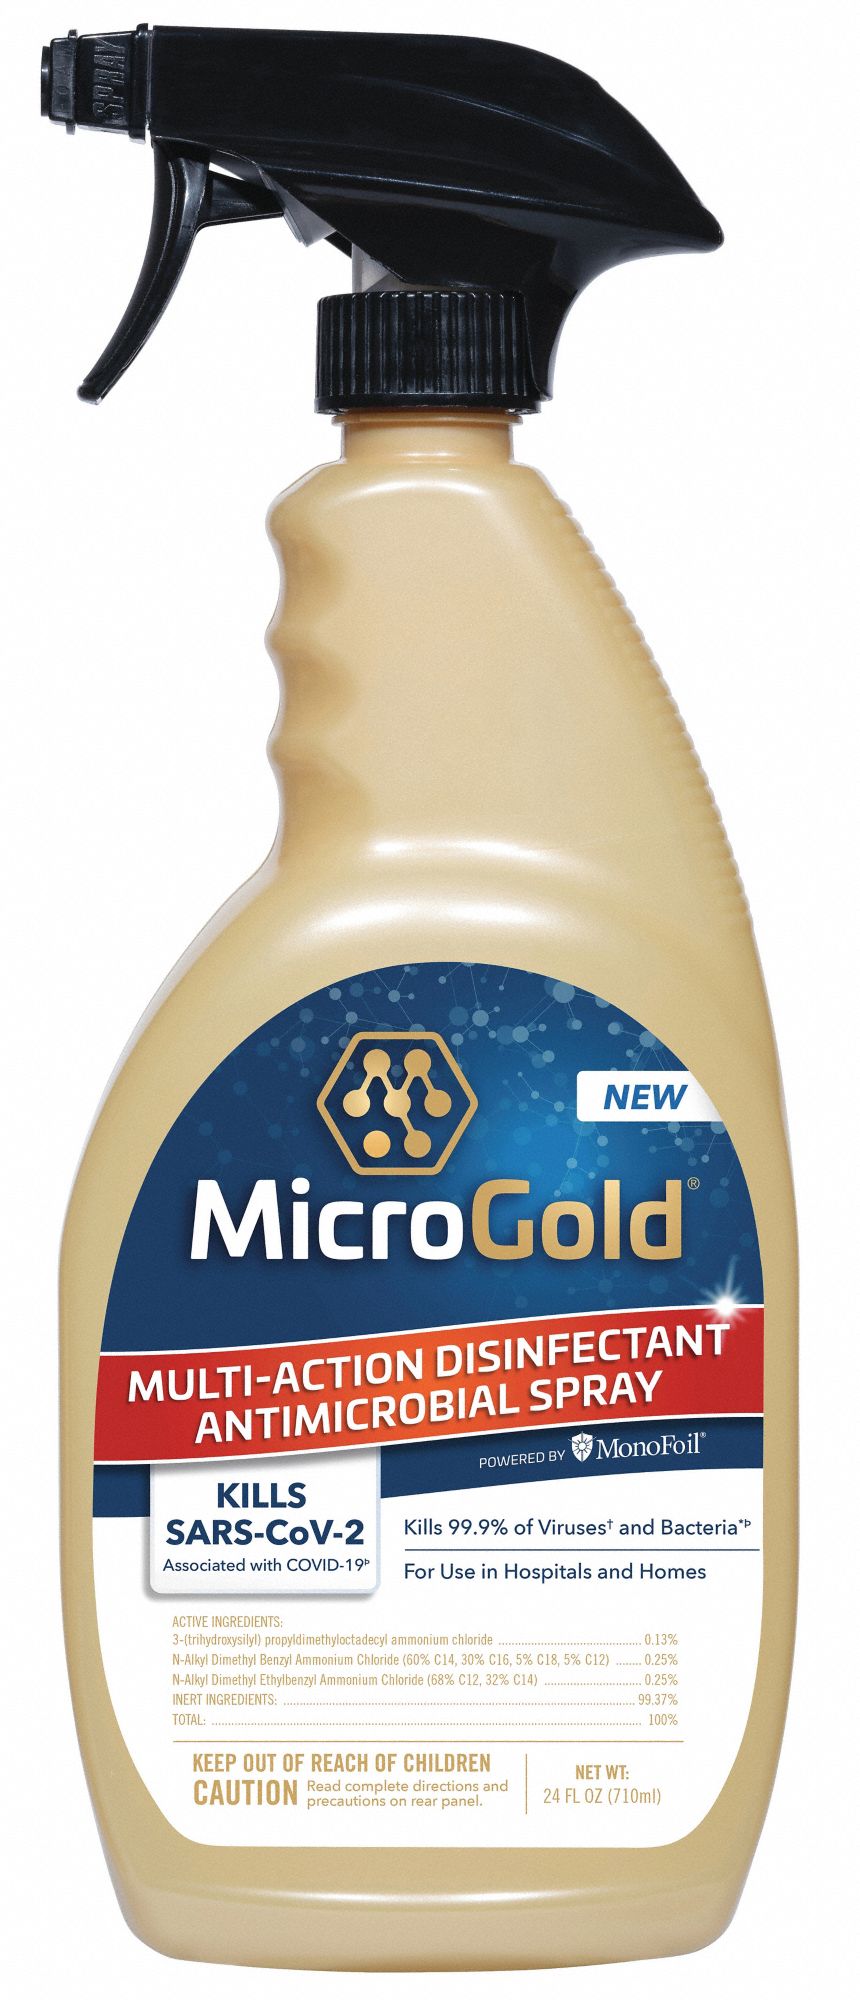 Multi-Action Disinfectant Antimicrobial Spray: Trigger Spray Bottle, Ready to Use, 6 PK